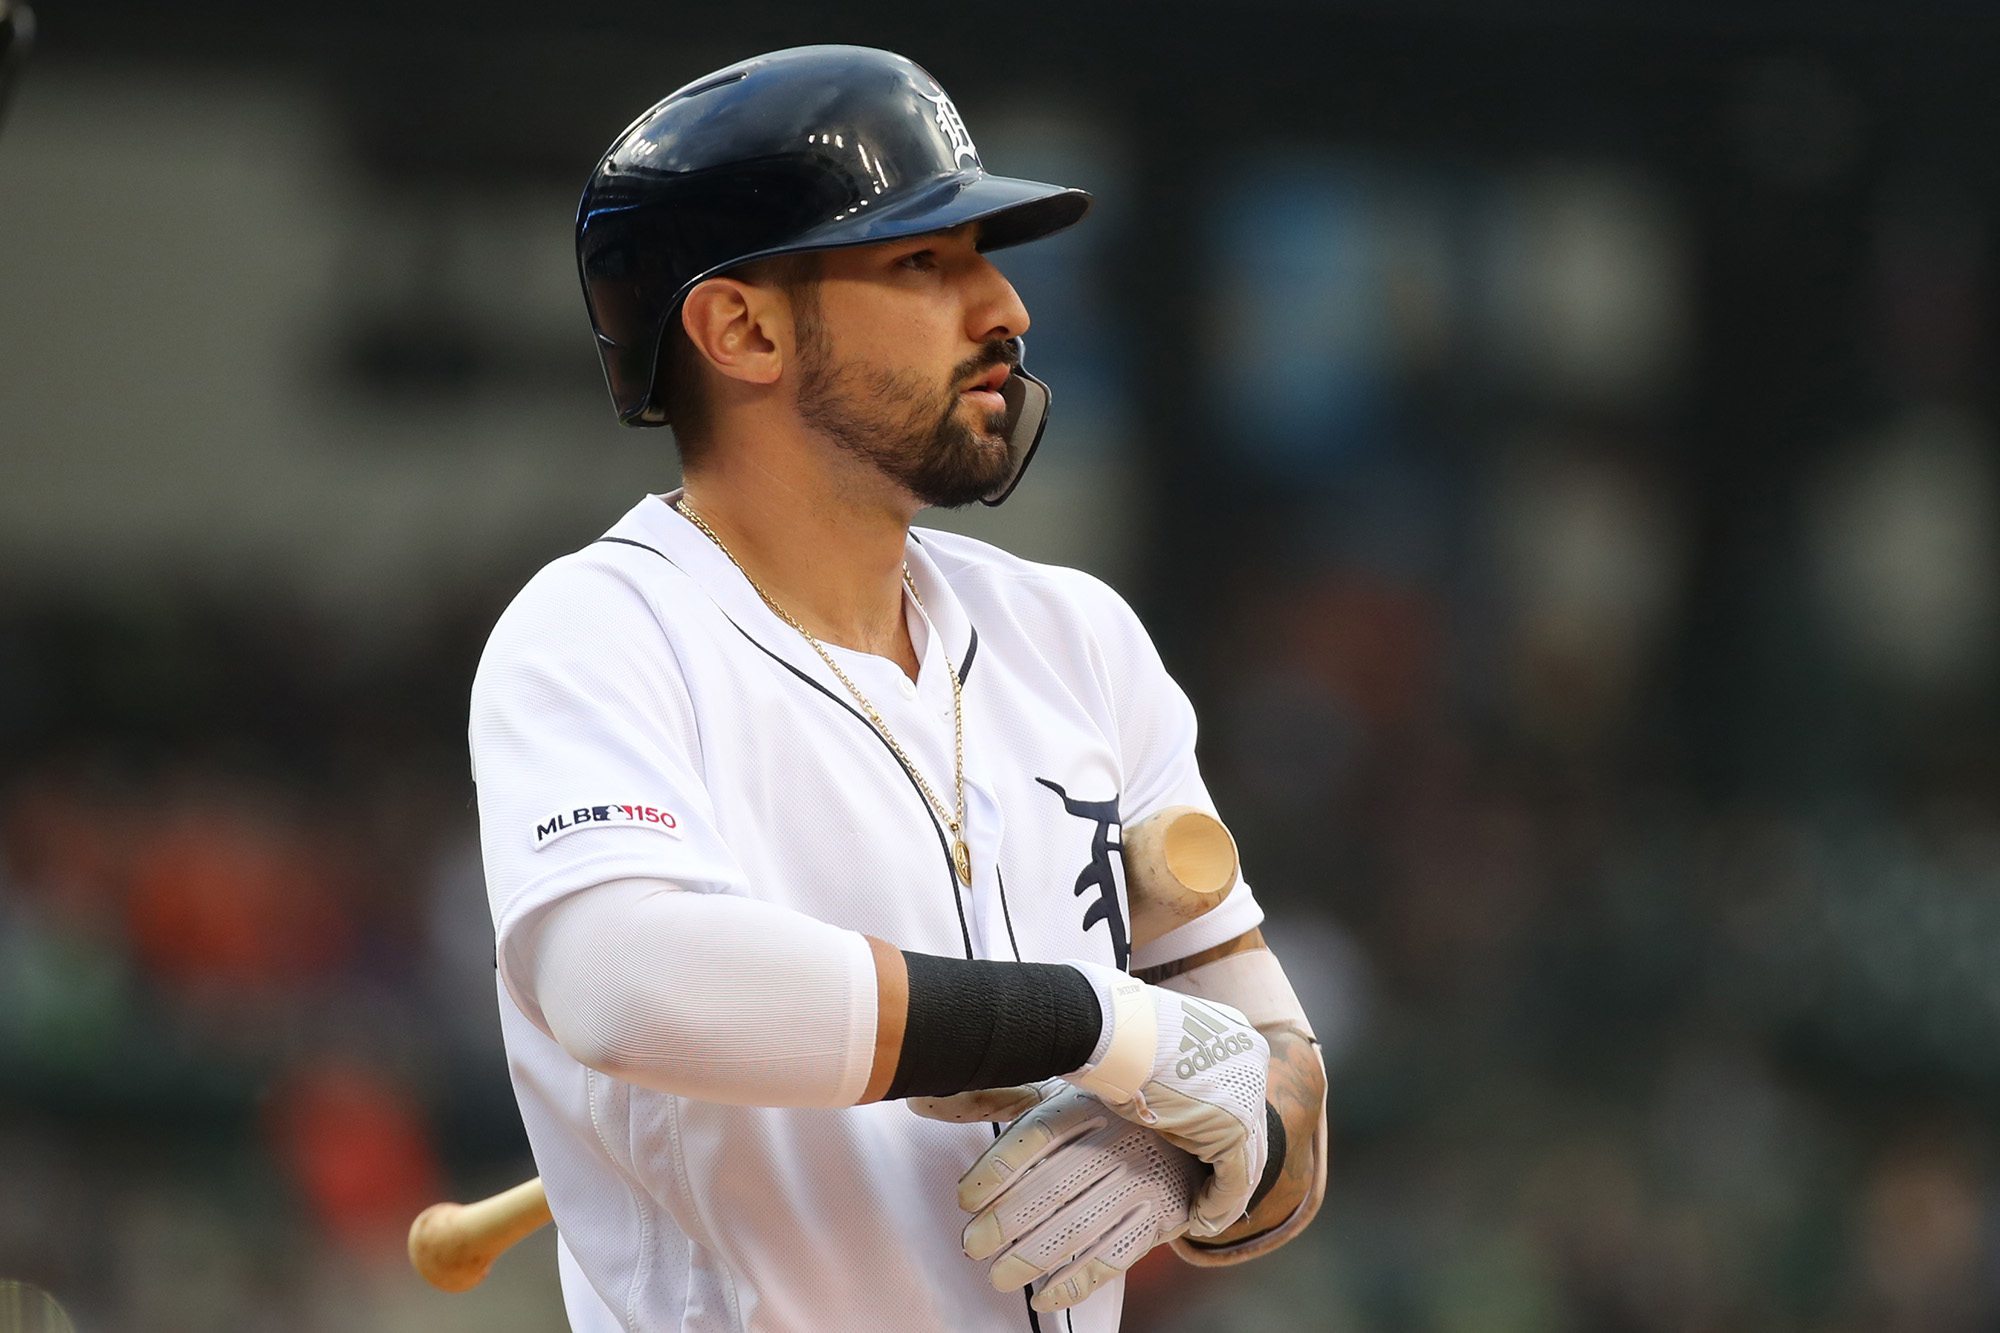 Nick Castellanos' edge goes back to national team days with Bryce Harper